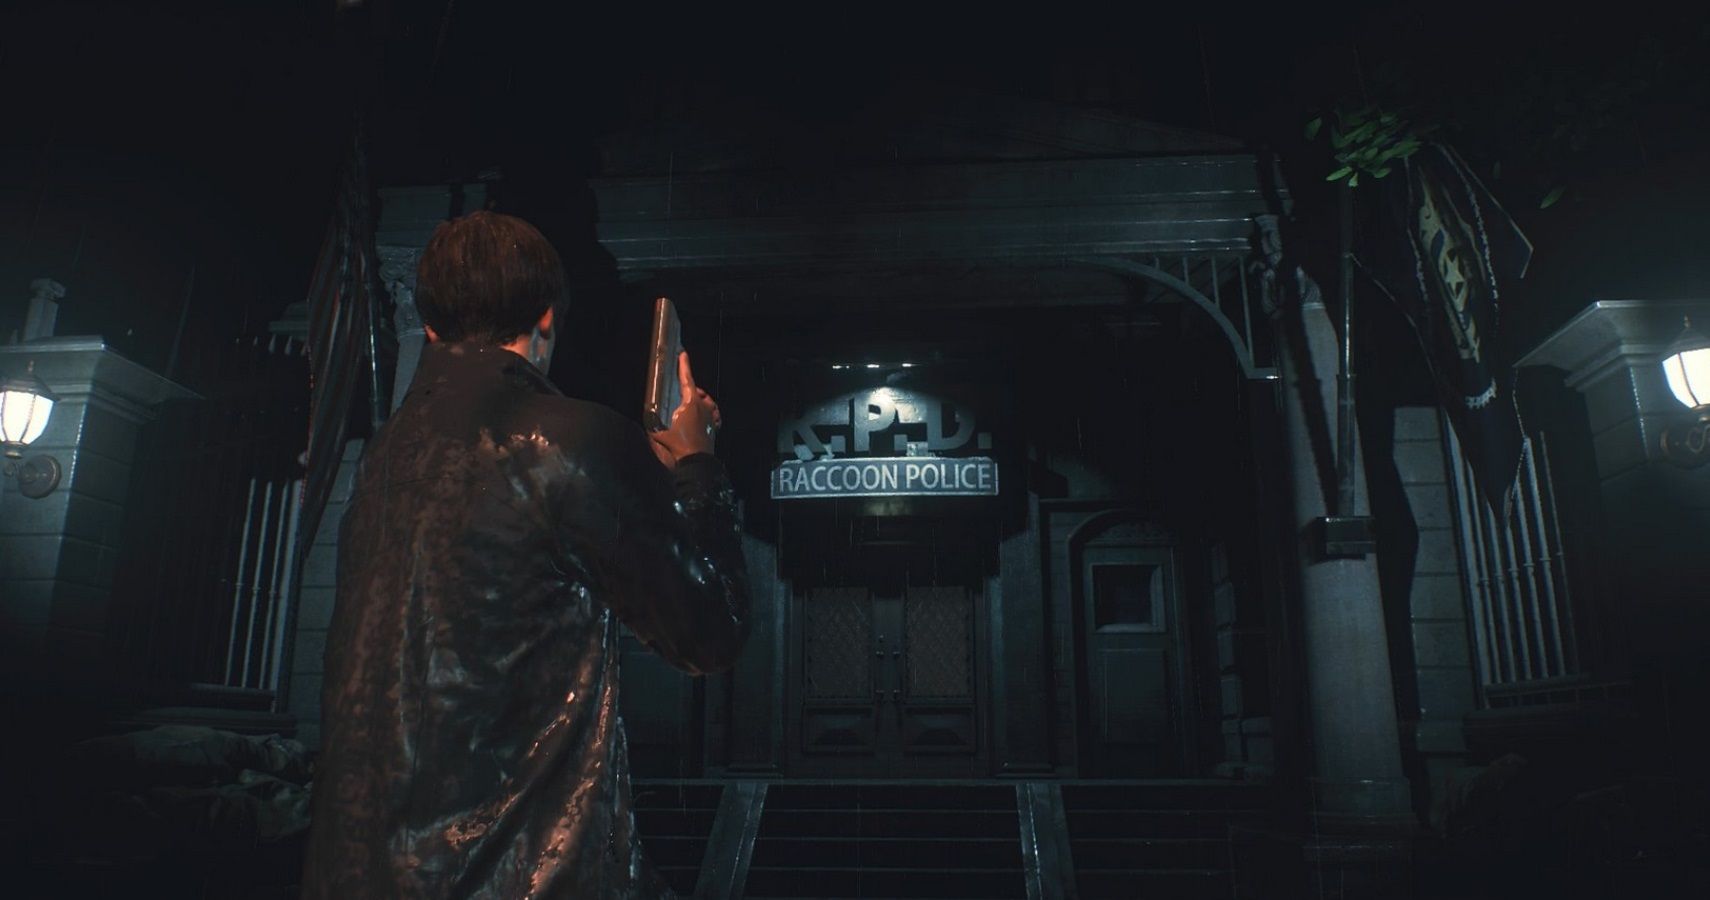 Ressident Evil: Welcome to Racoon City has been delayed to Novemer 24